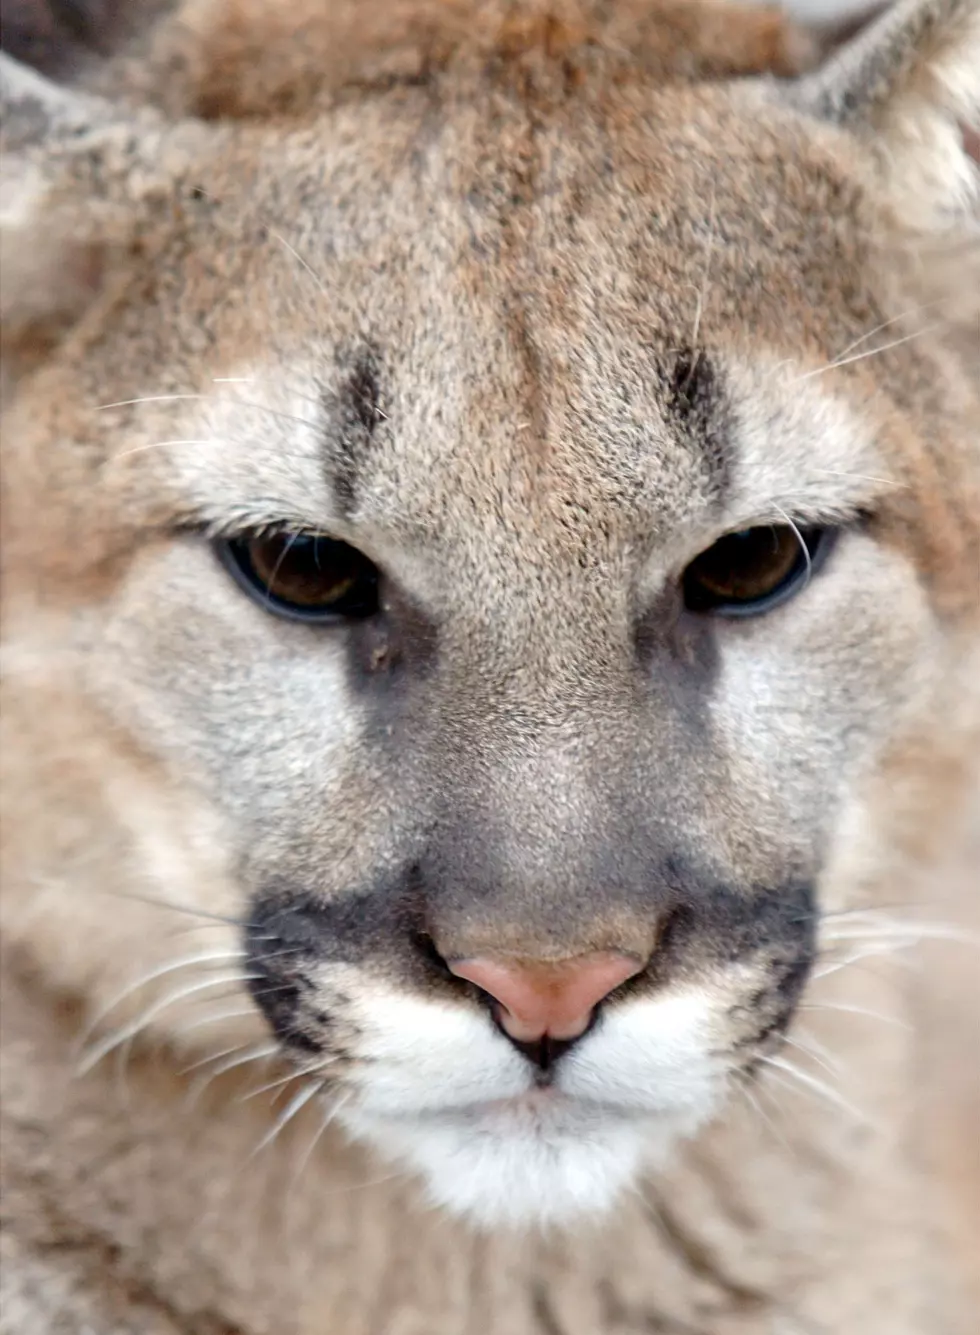 What You Should – and Should Not – Do If You Encounter a Mountain Lion